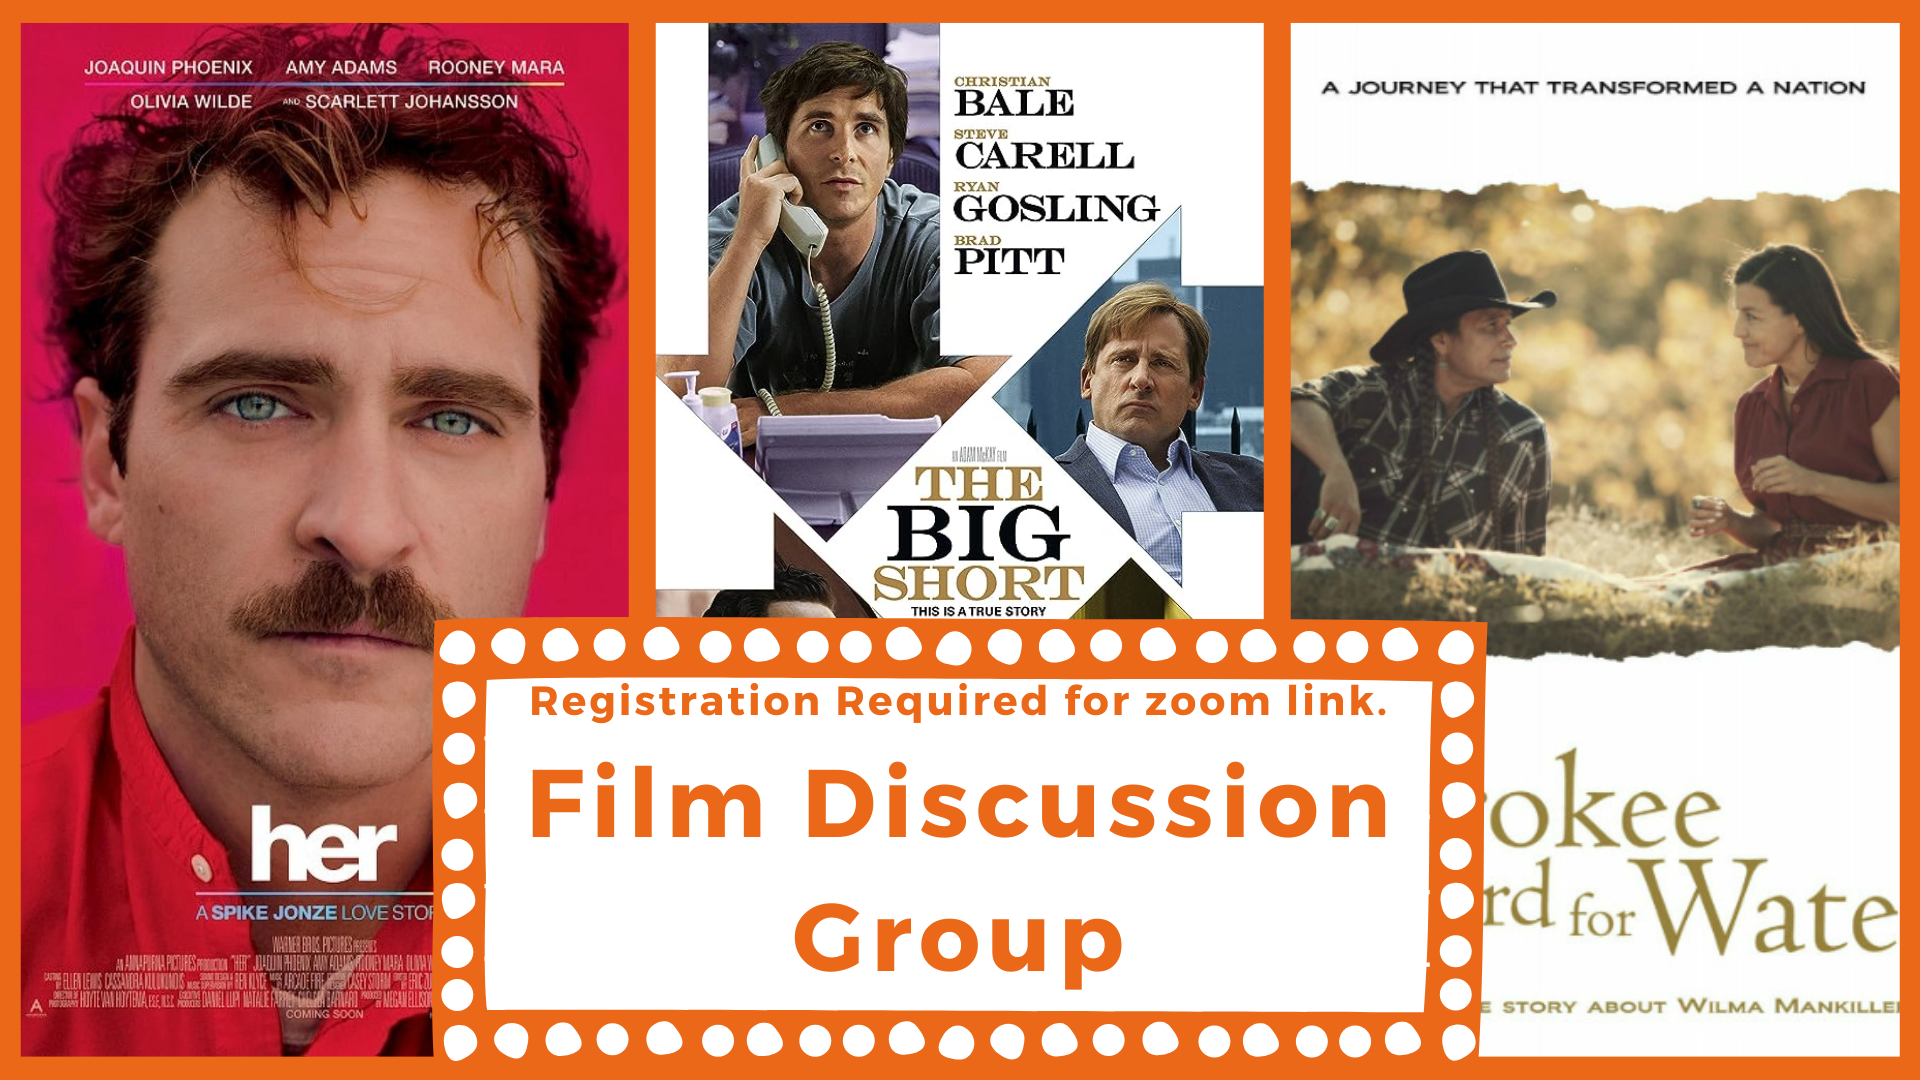 Film Discussion Group - registration required for zoom link